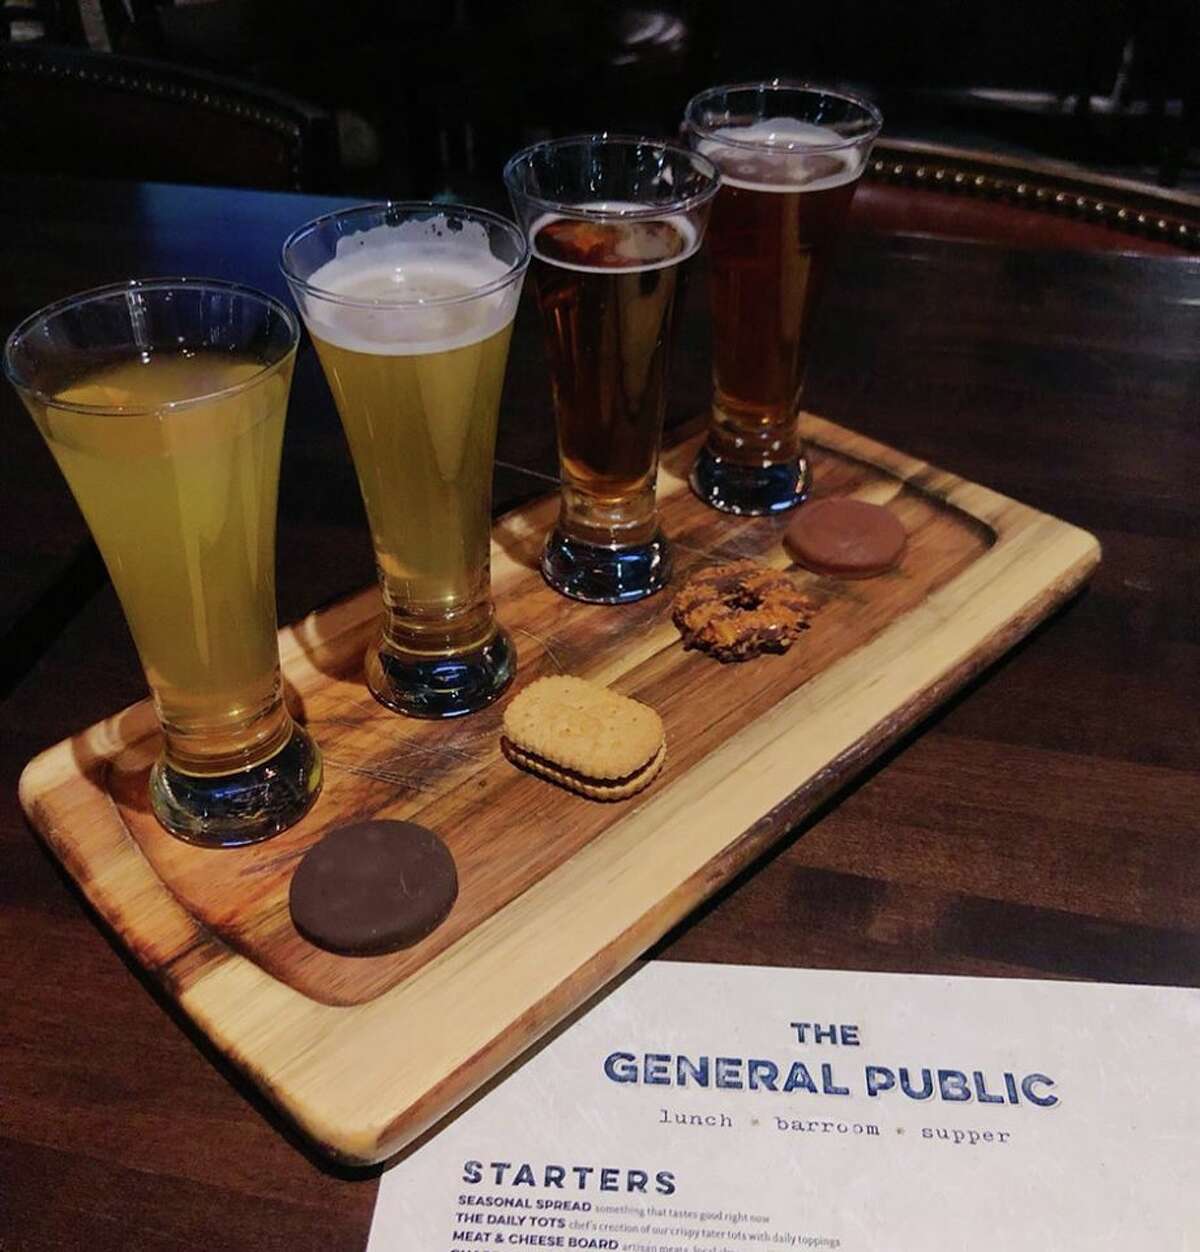 The General Public is offering a flight with four cookies and four beers from Karbach Brewing Company for $10 until March 15. The Rim restaurant and bar describes the offer as the joining of "two irresistible treats." Four options from the Houston-based brewery to complement the flavor profile of Thin Mints, S'mores, Tagalongs and Samoas.